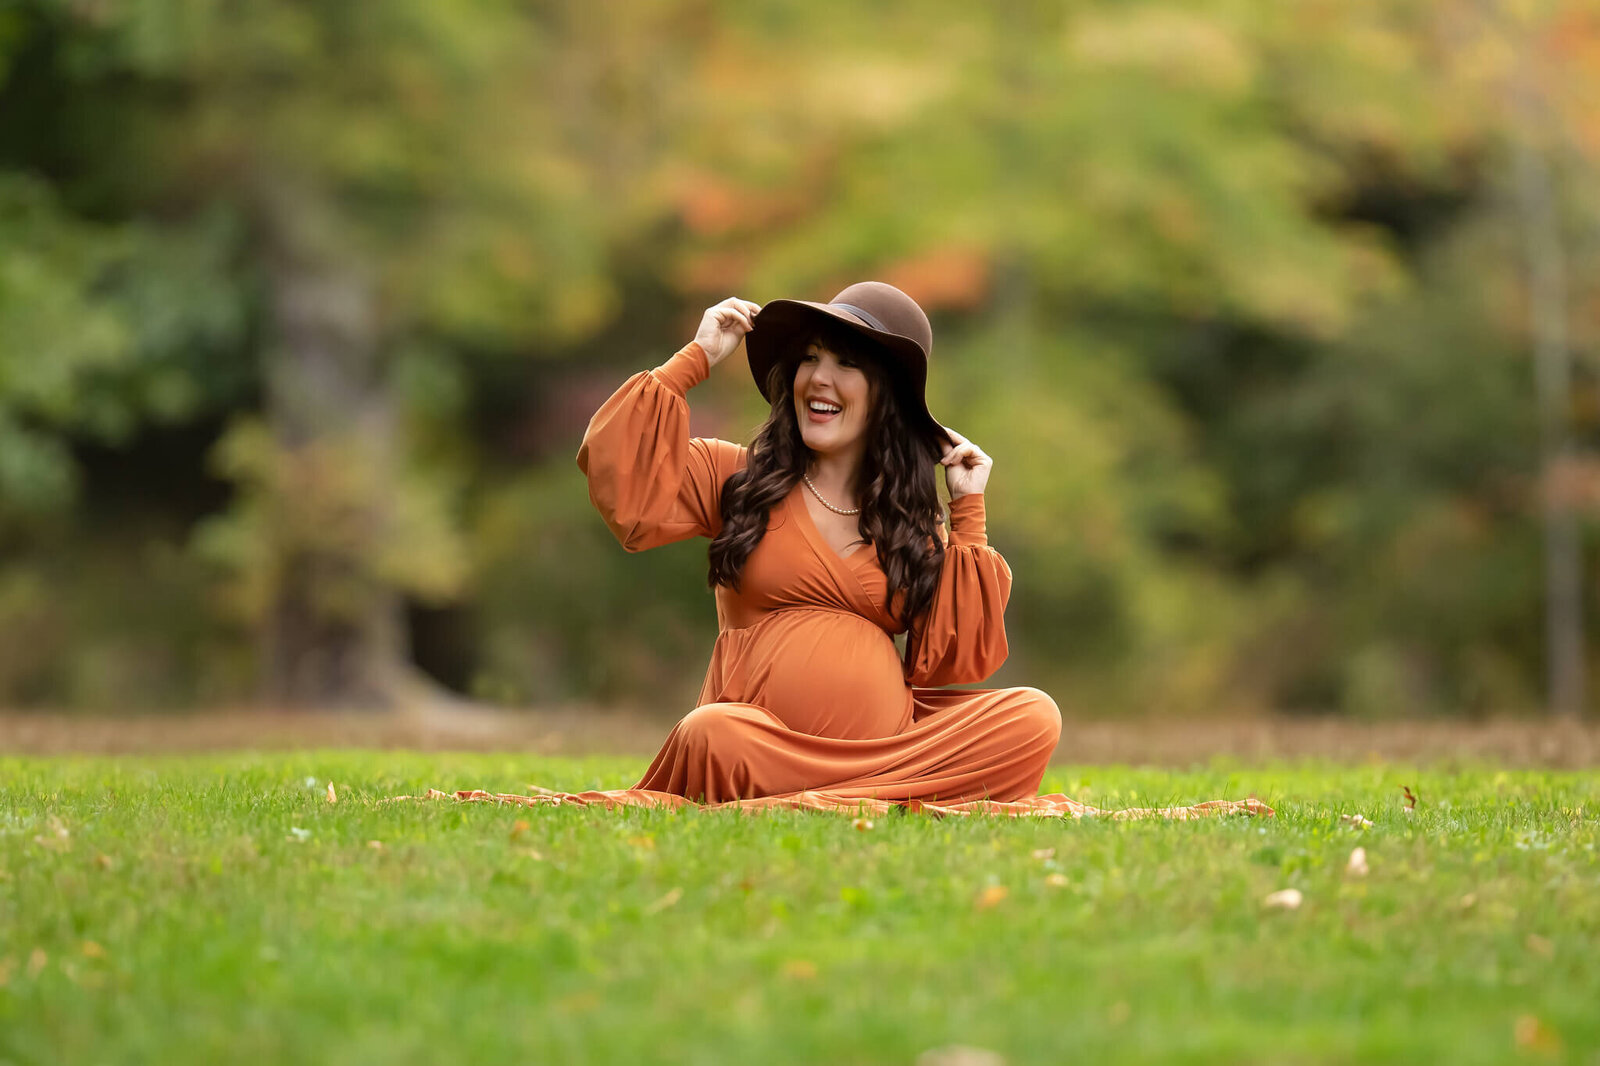 Pregnant mother sitting in grass holding on to her oversized hat